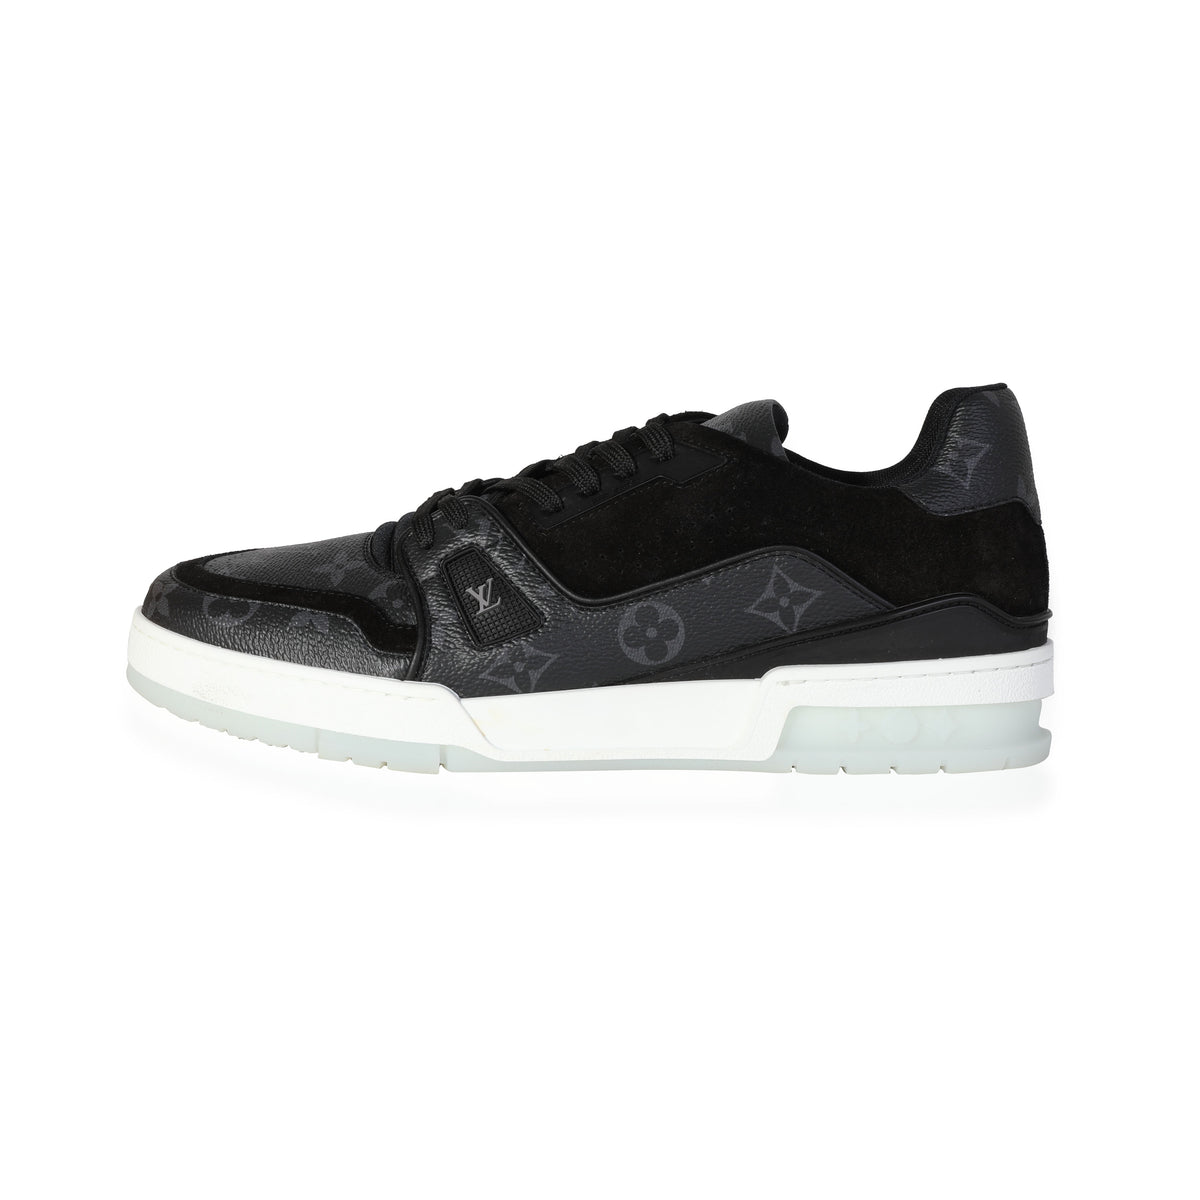 Louis Vuitton Trainer Black and White